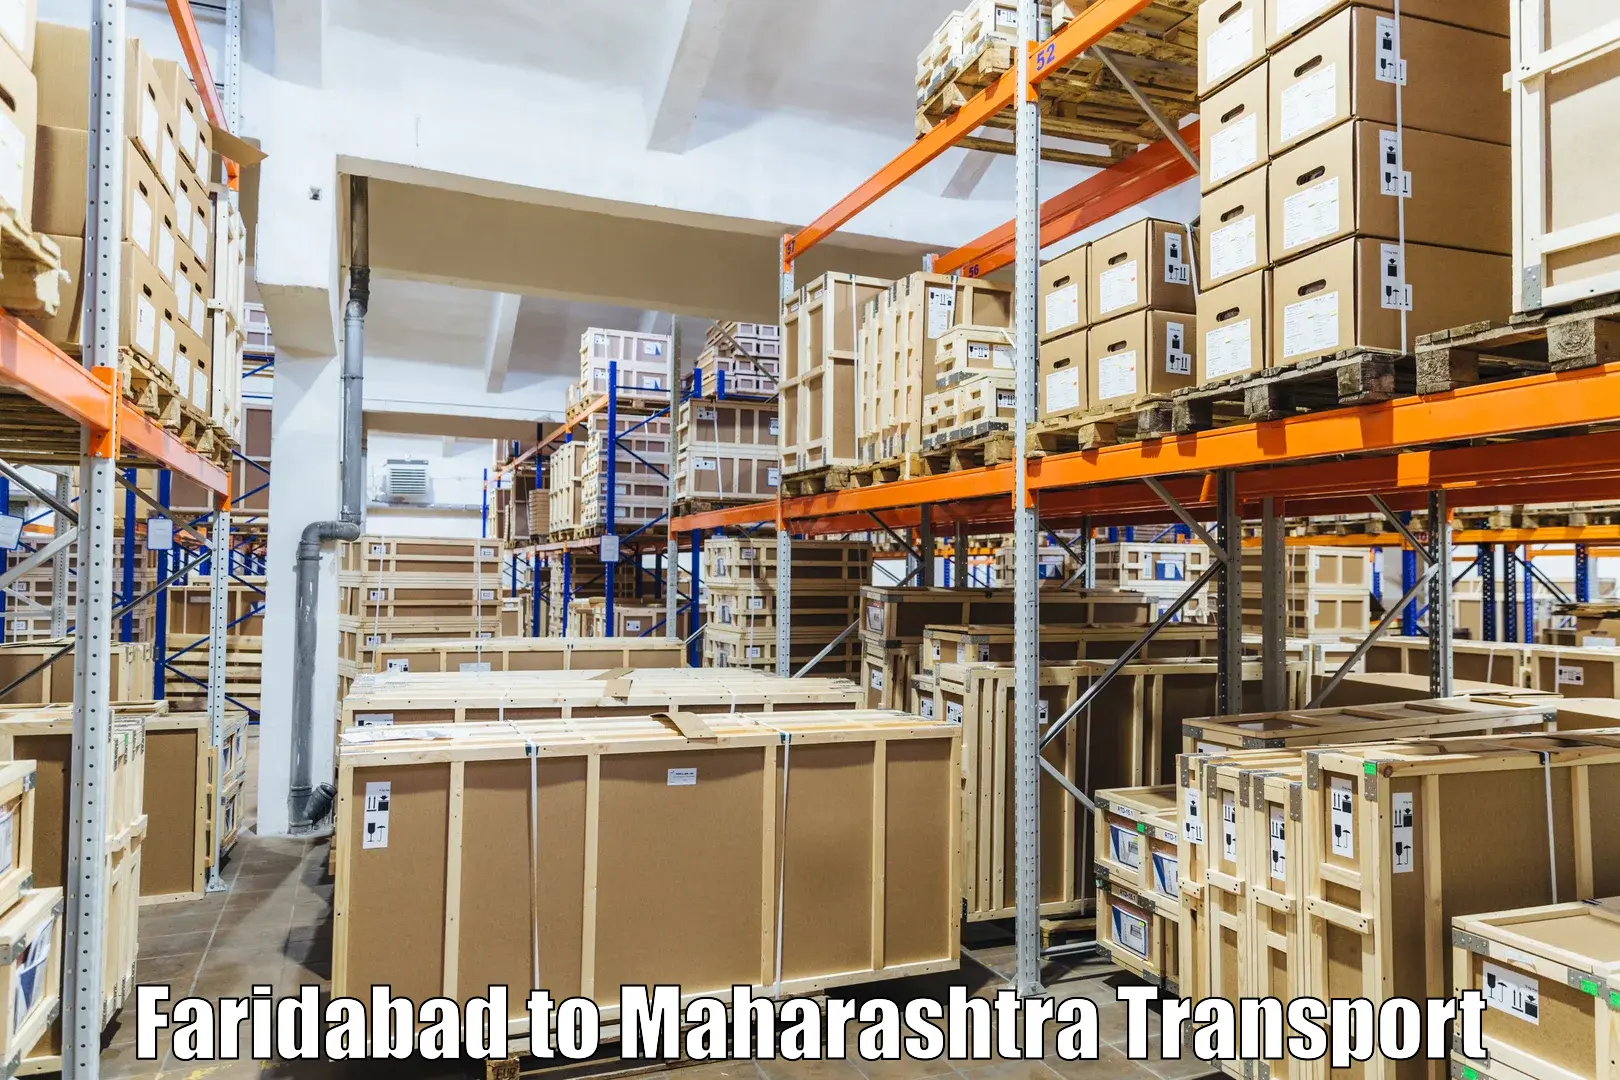 Land transport services in Faridabad to Hinganghat